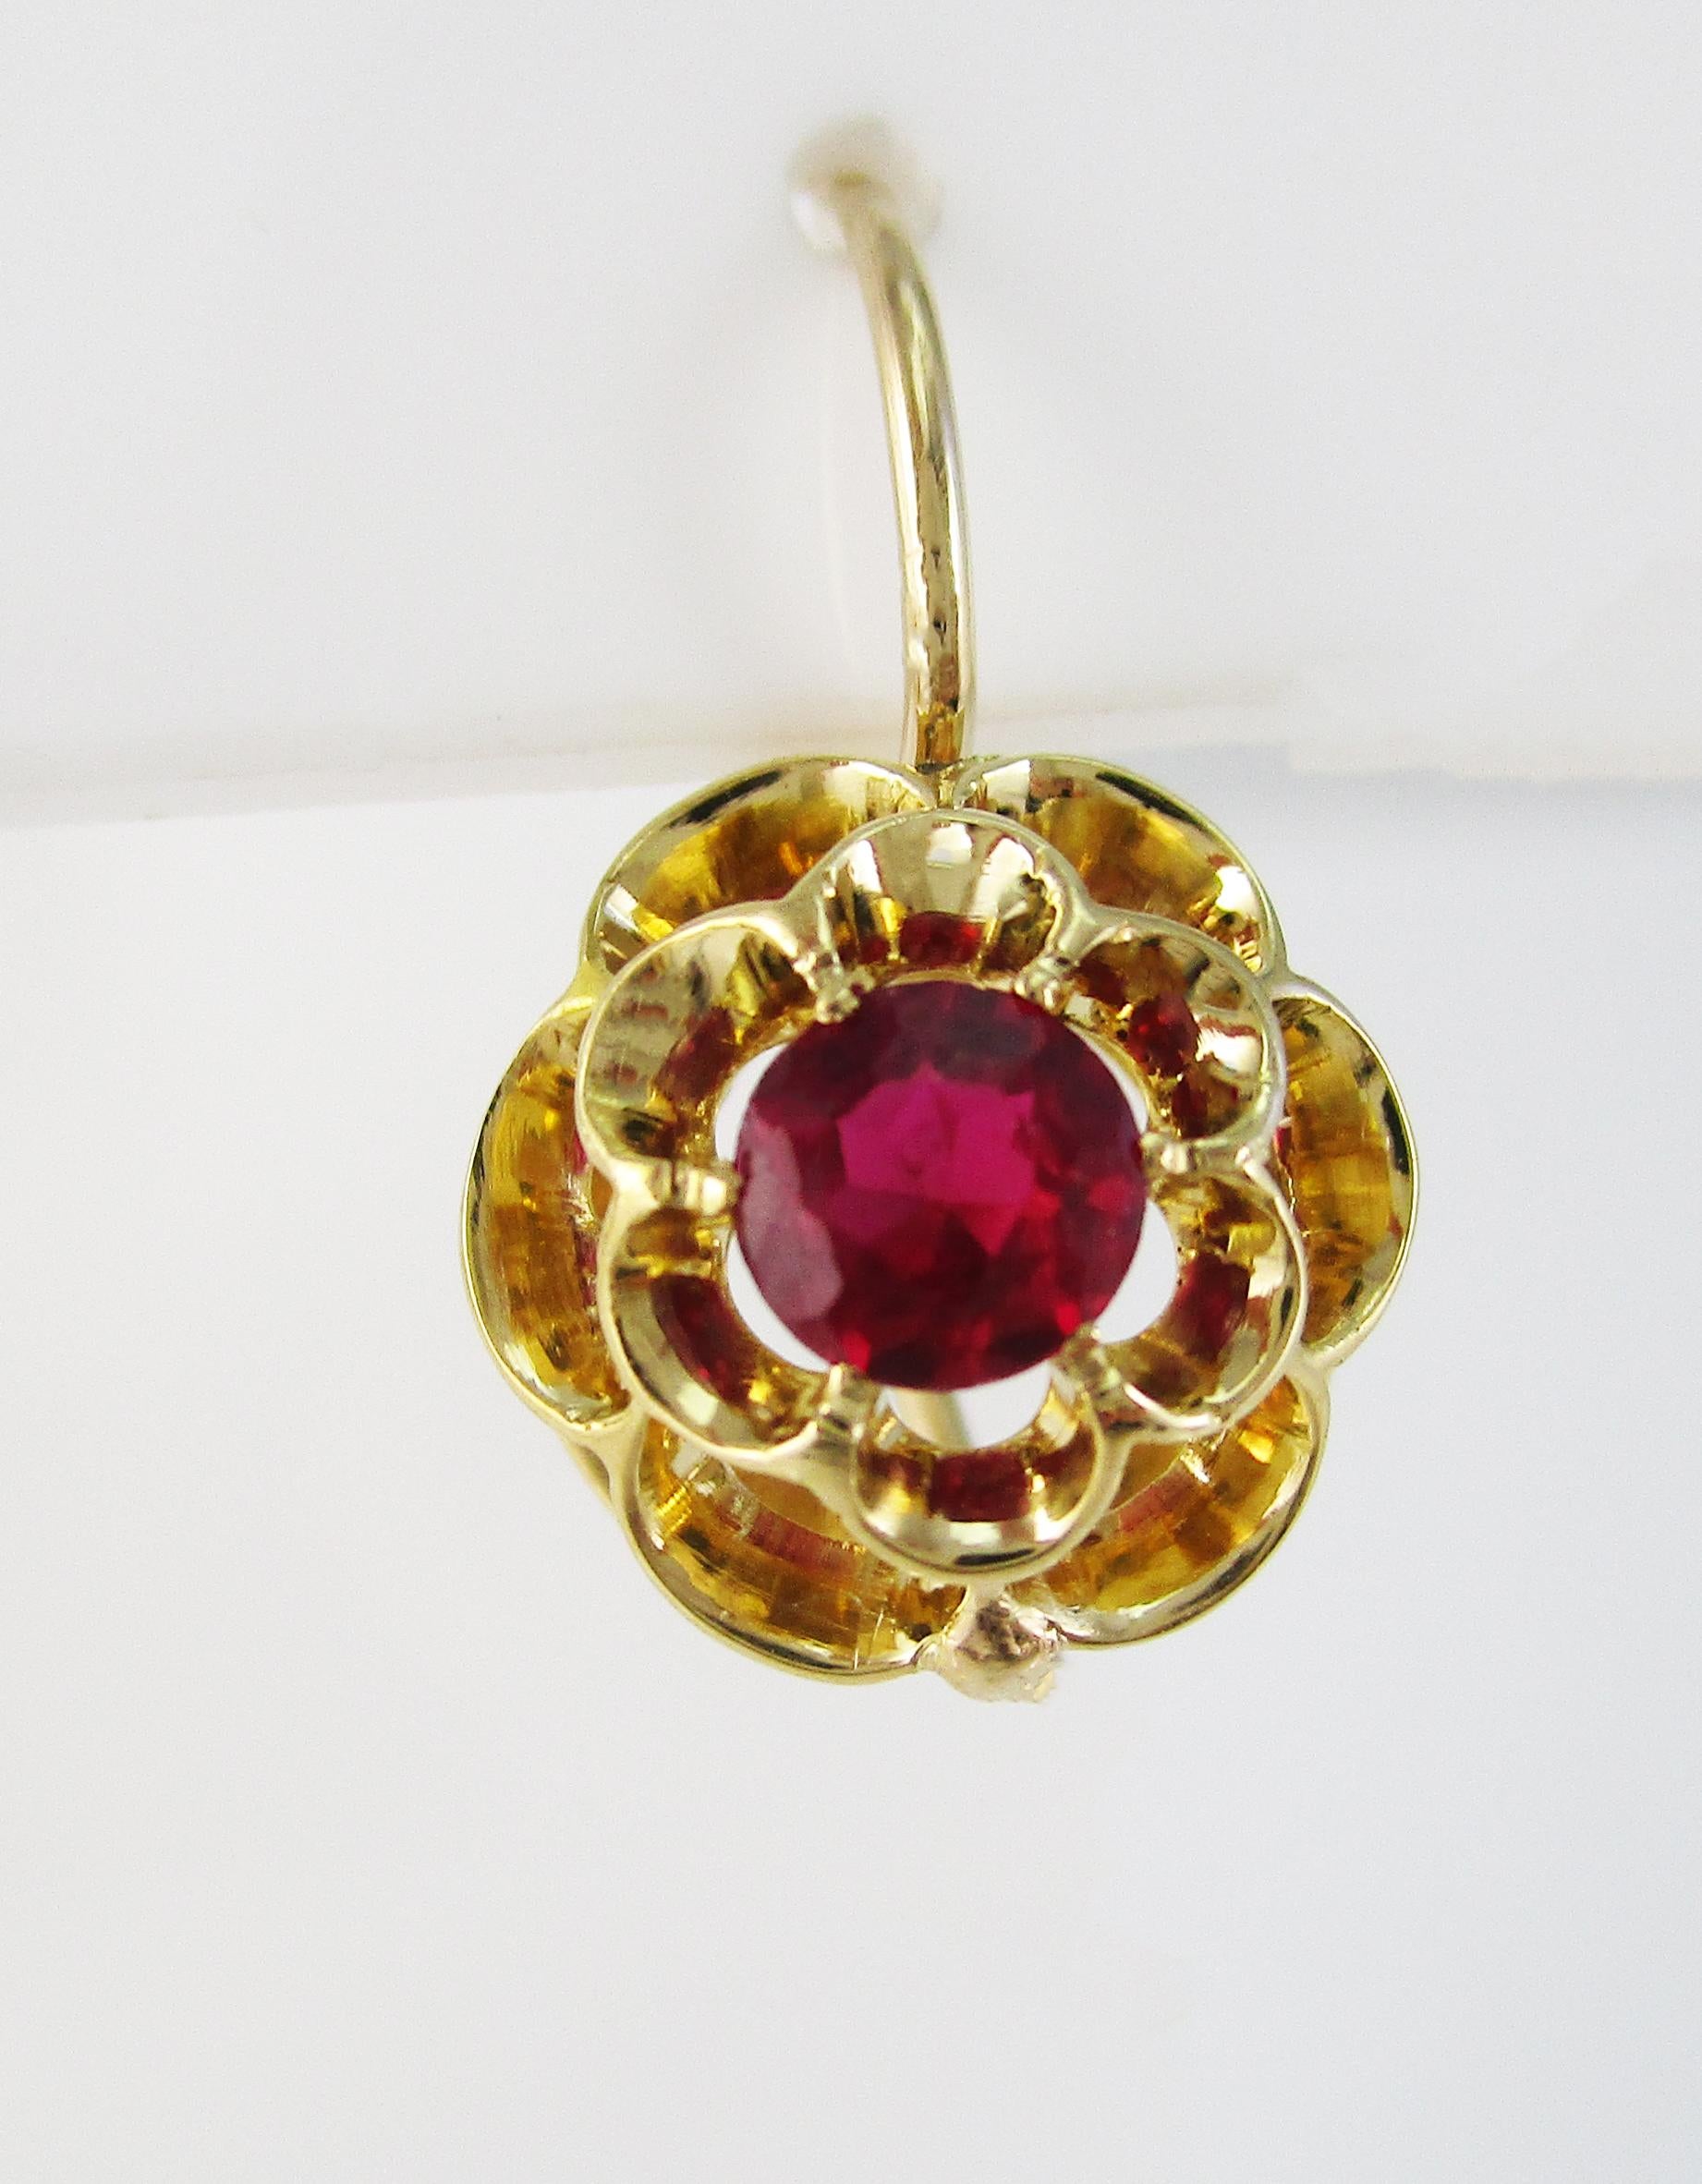 These gorgeous Victorian earrings are in 18k yellow gold and are a lovely floral dangle design featuring ruby center stones! The combination of yellow gold and red ruby is a classic Victorian look that is timeless and elegant! The red rubies are set